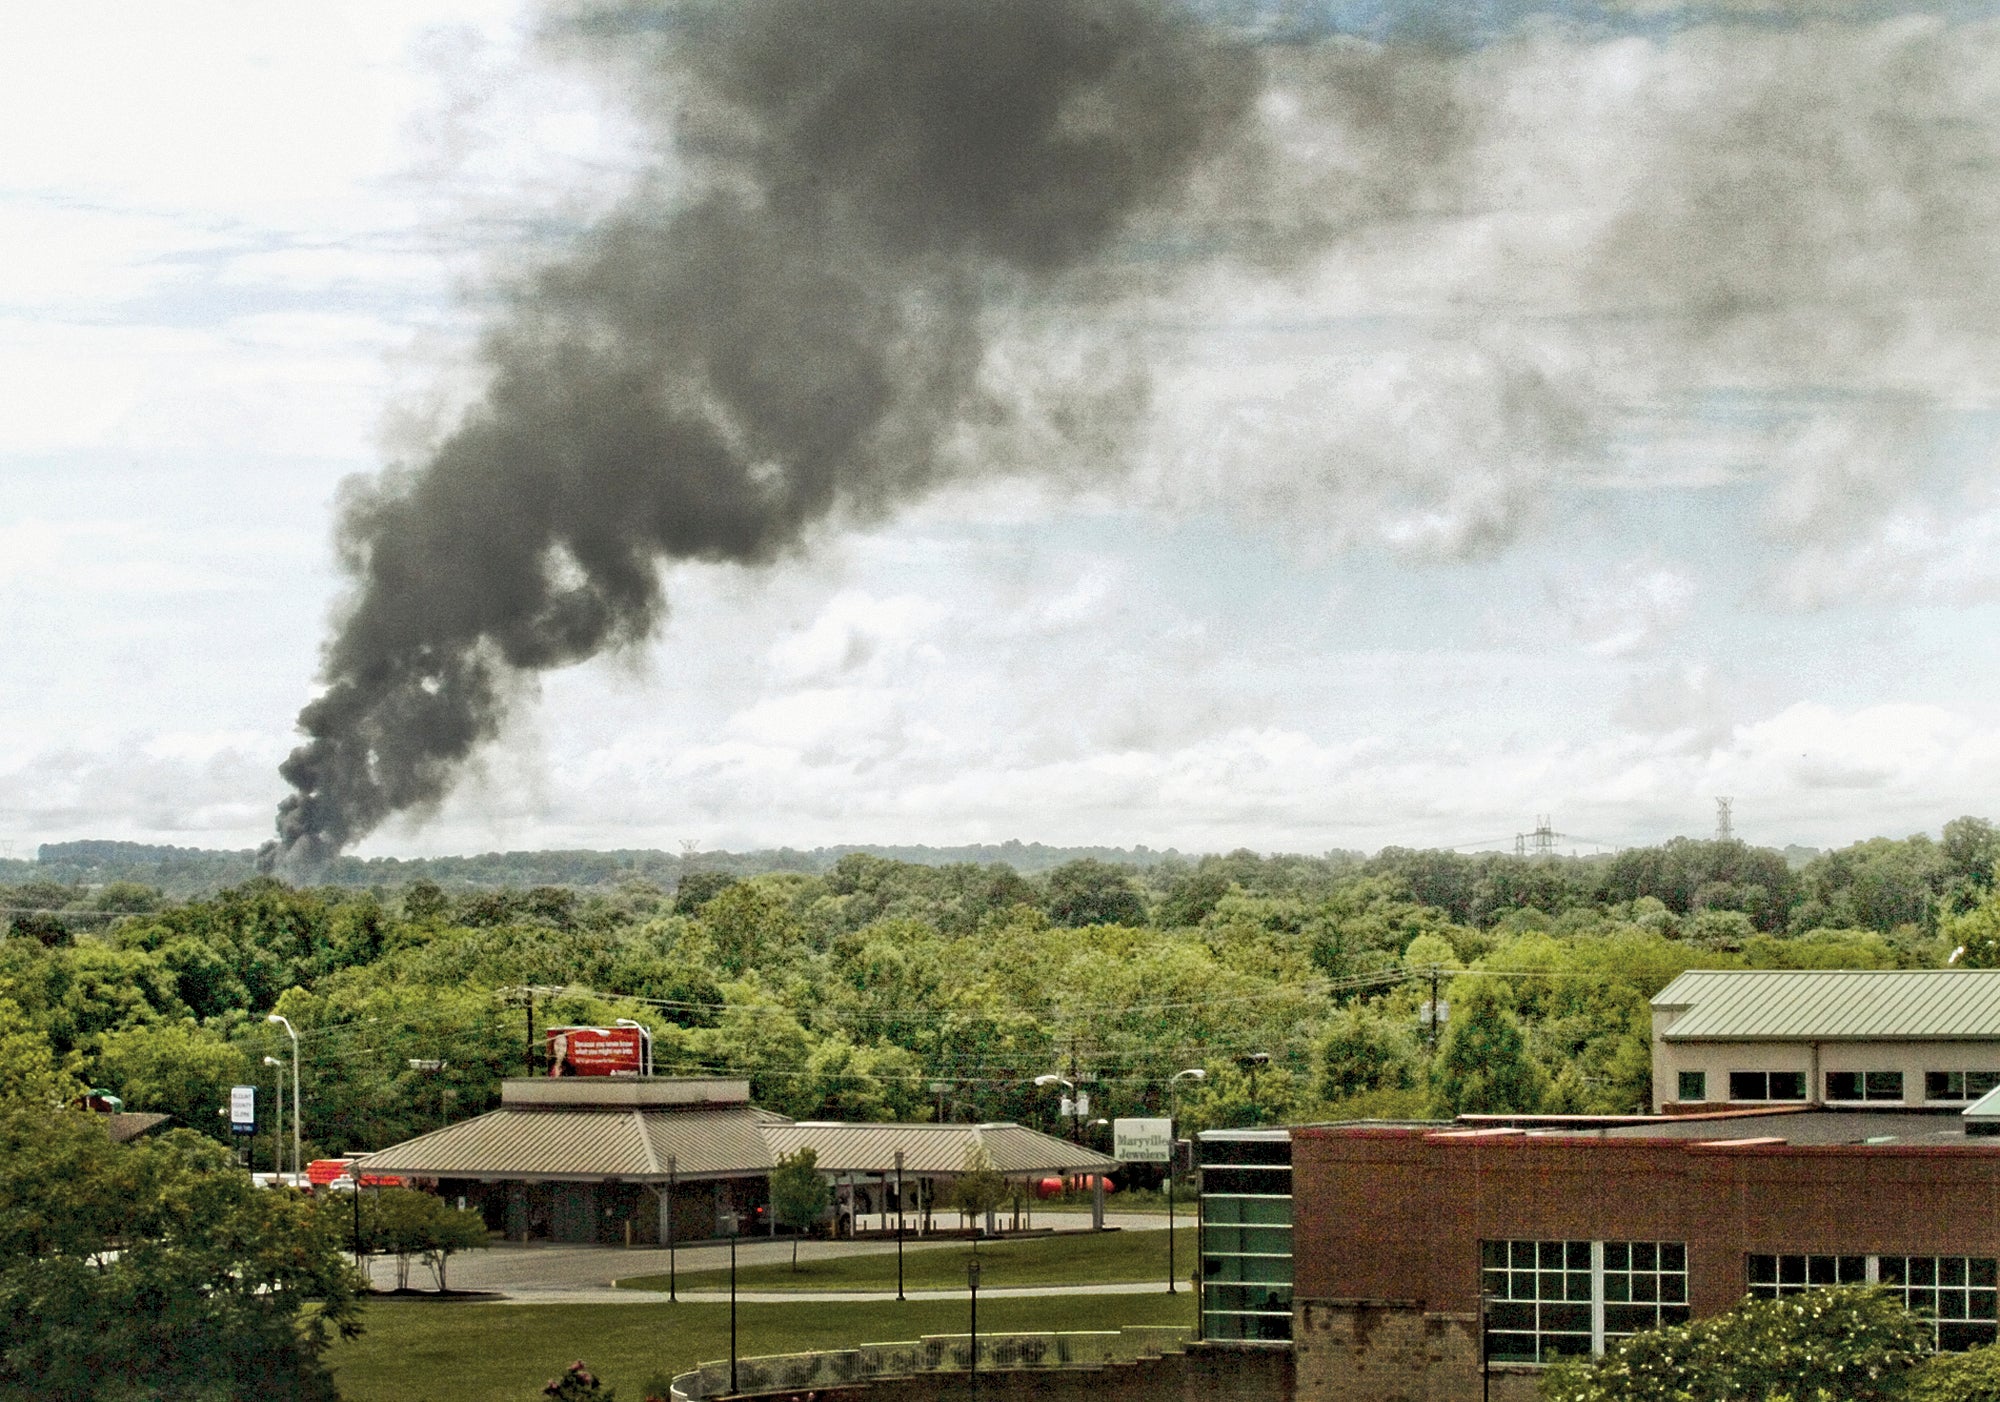 Smoke rises from the derailment site over Maryville on July 2, 2015. (Photo: Mark A Large/The Daily Times, AP)